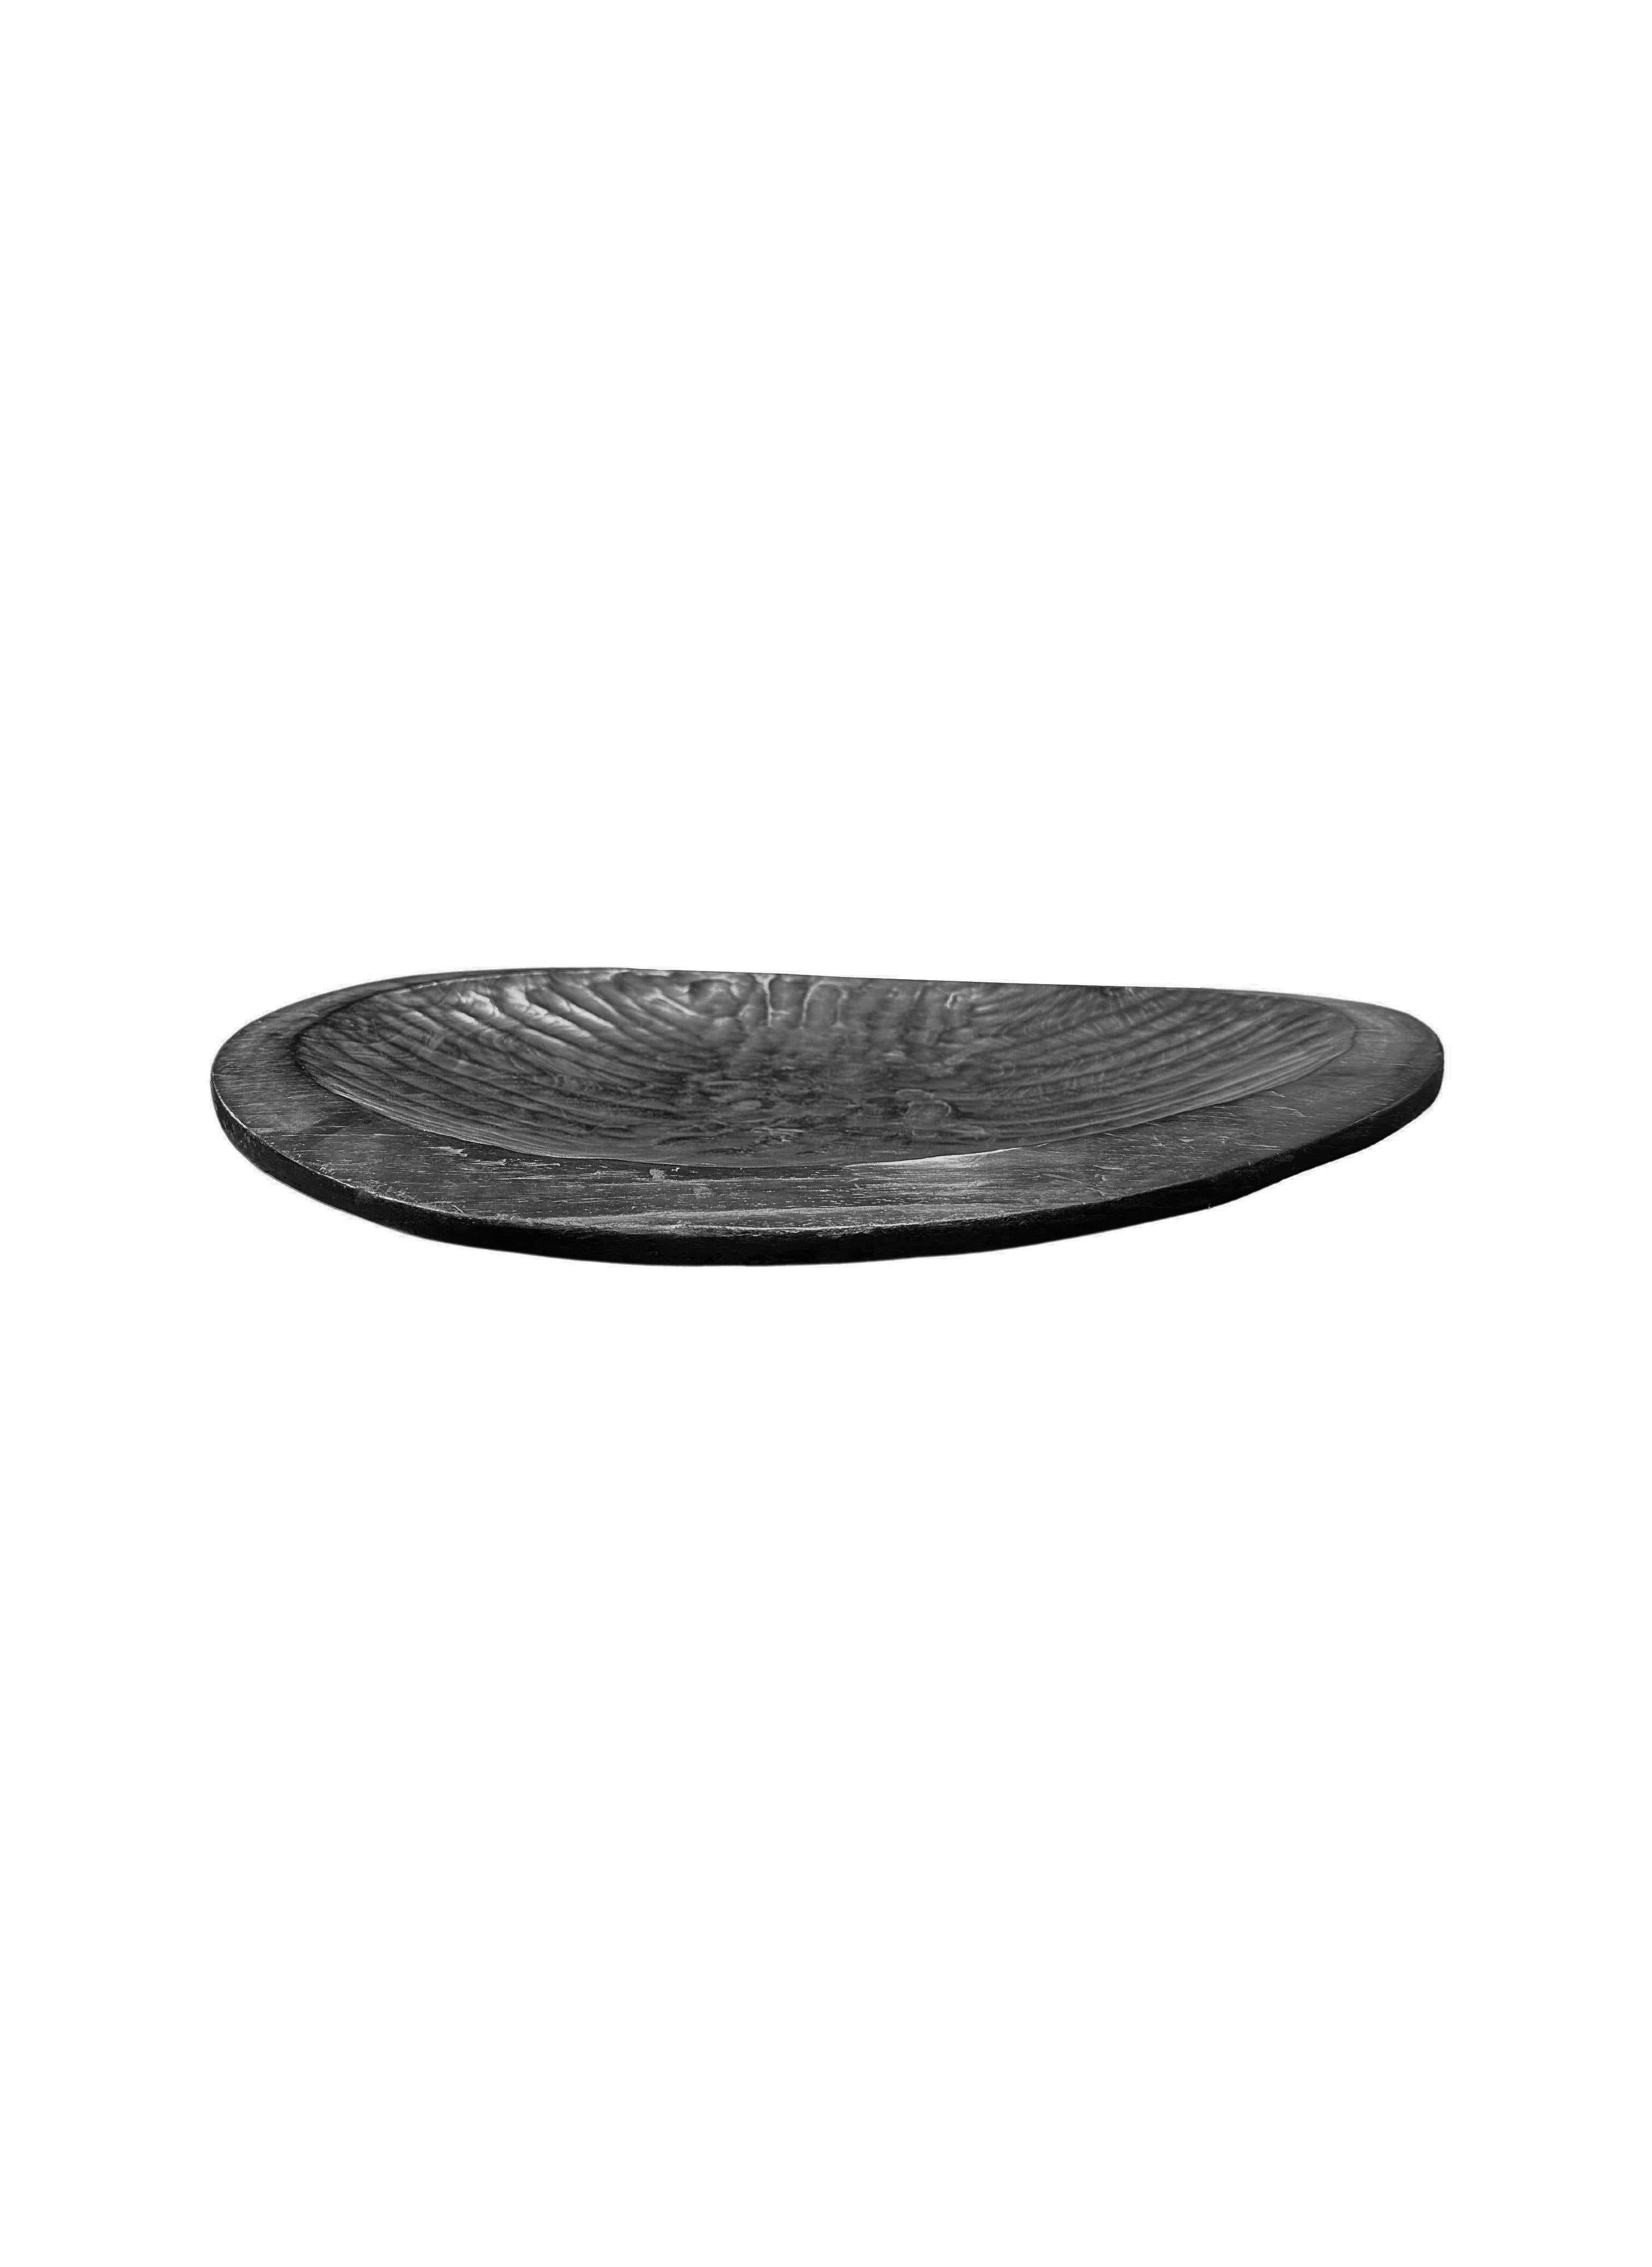 A hand-crafted mango wood bowl with hand-hewn detailing along the basin. The bowl was cut from a much larger slab of mango wood and features wonderful mix of wood textures. To achieve the rich black colour the bowl was burnt three times and finished